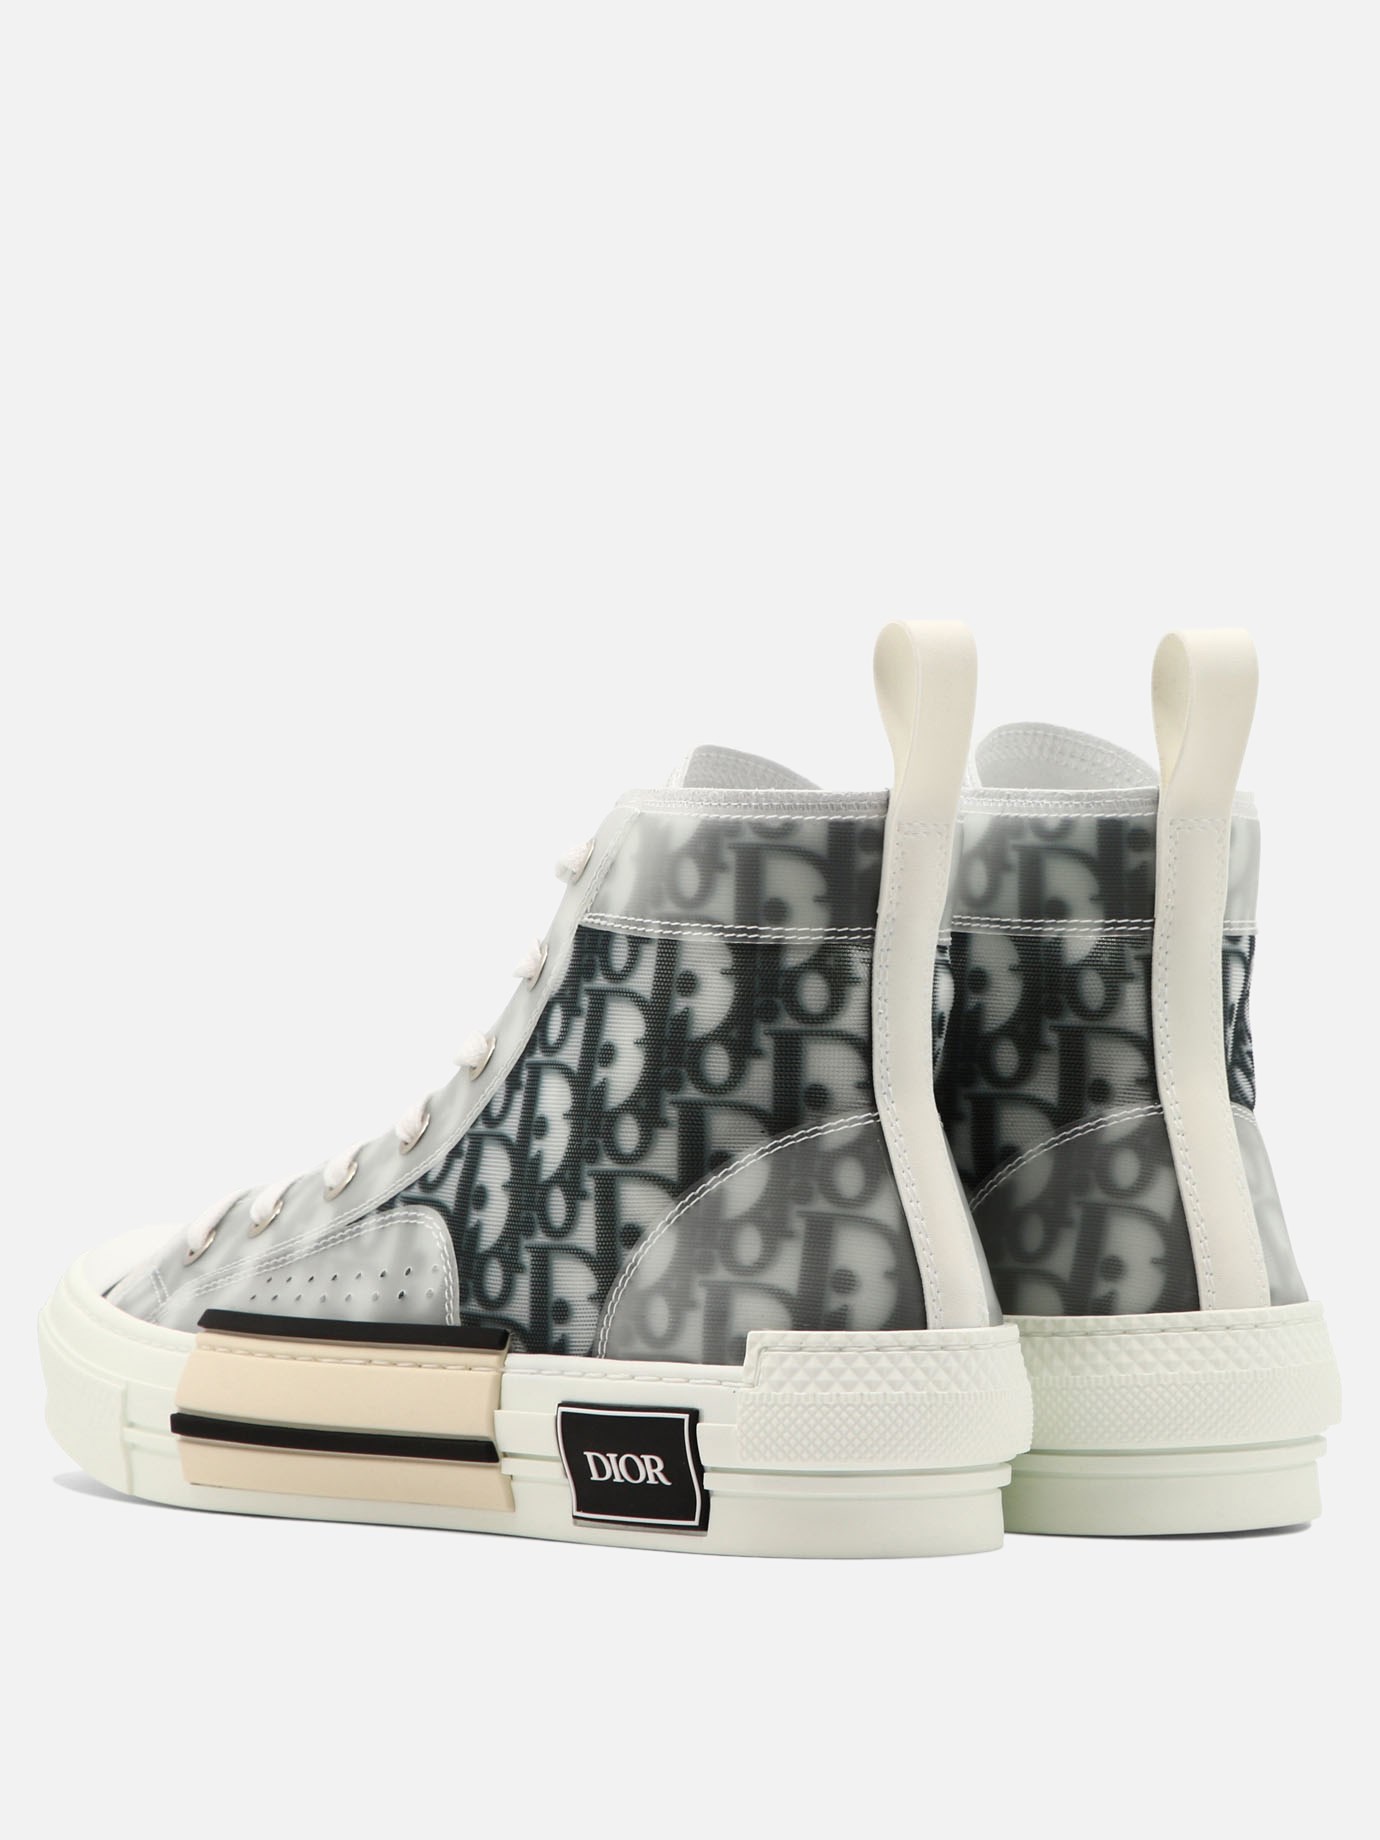  B23  sneakers by Dior